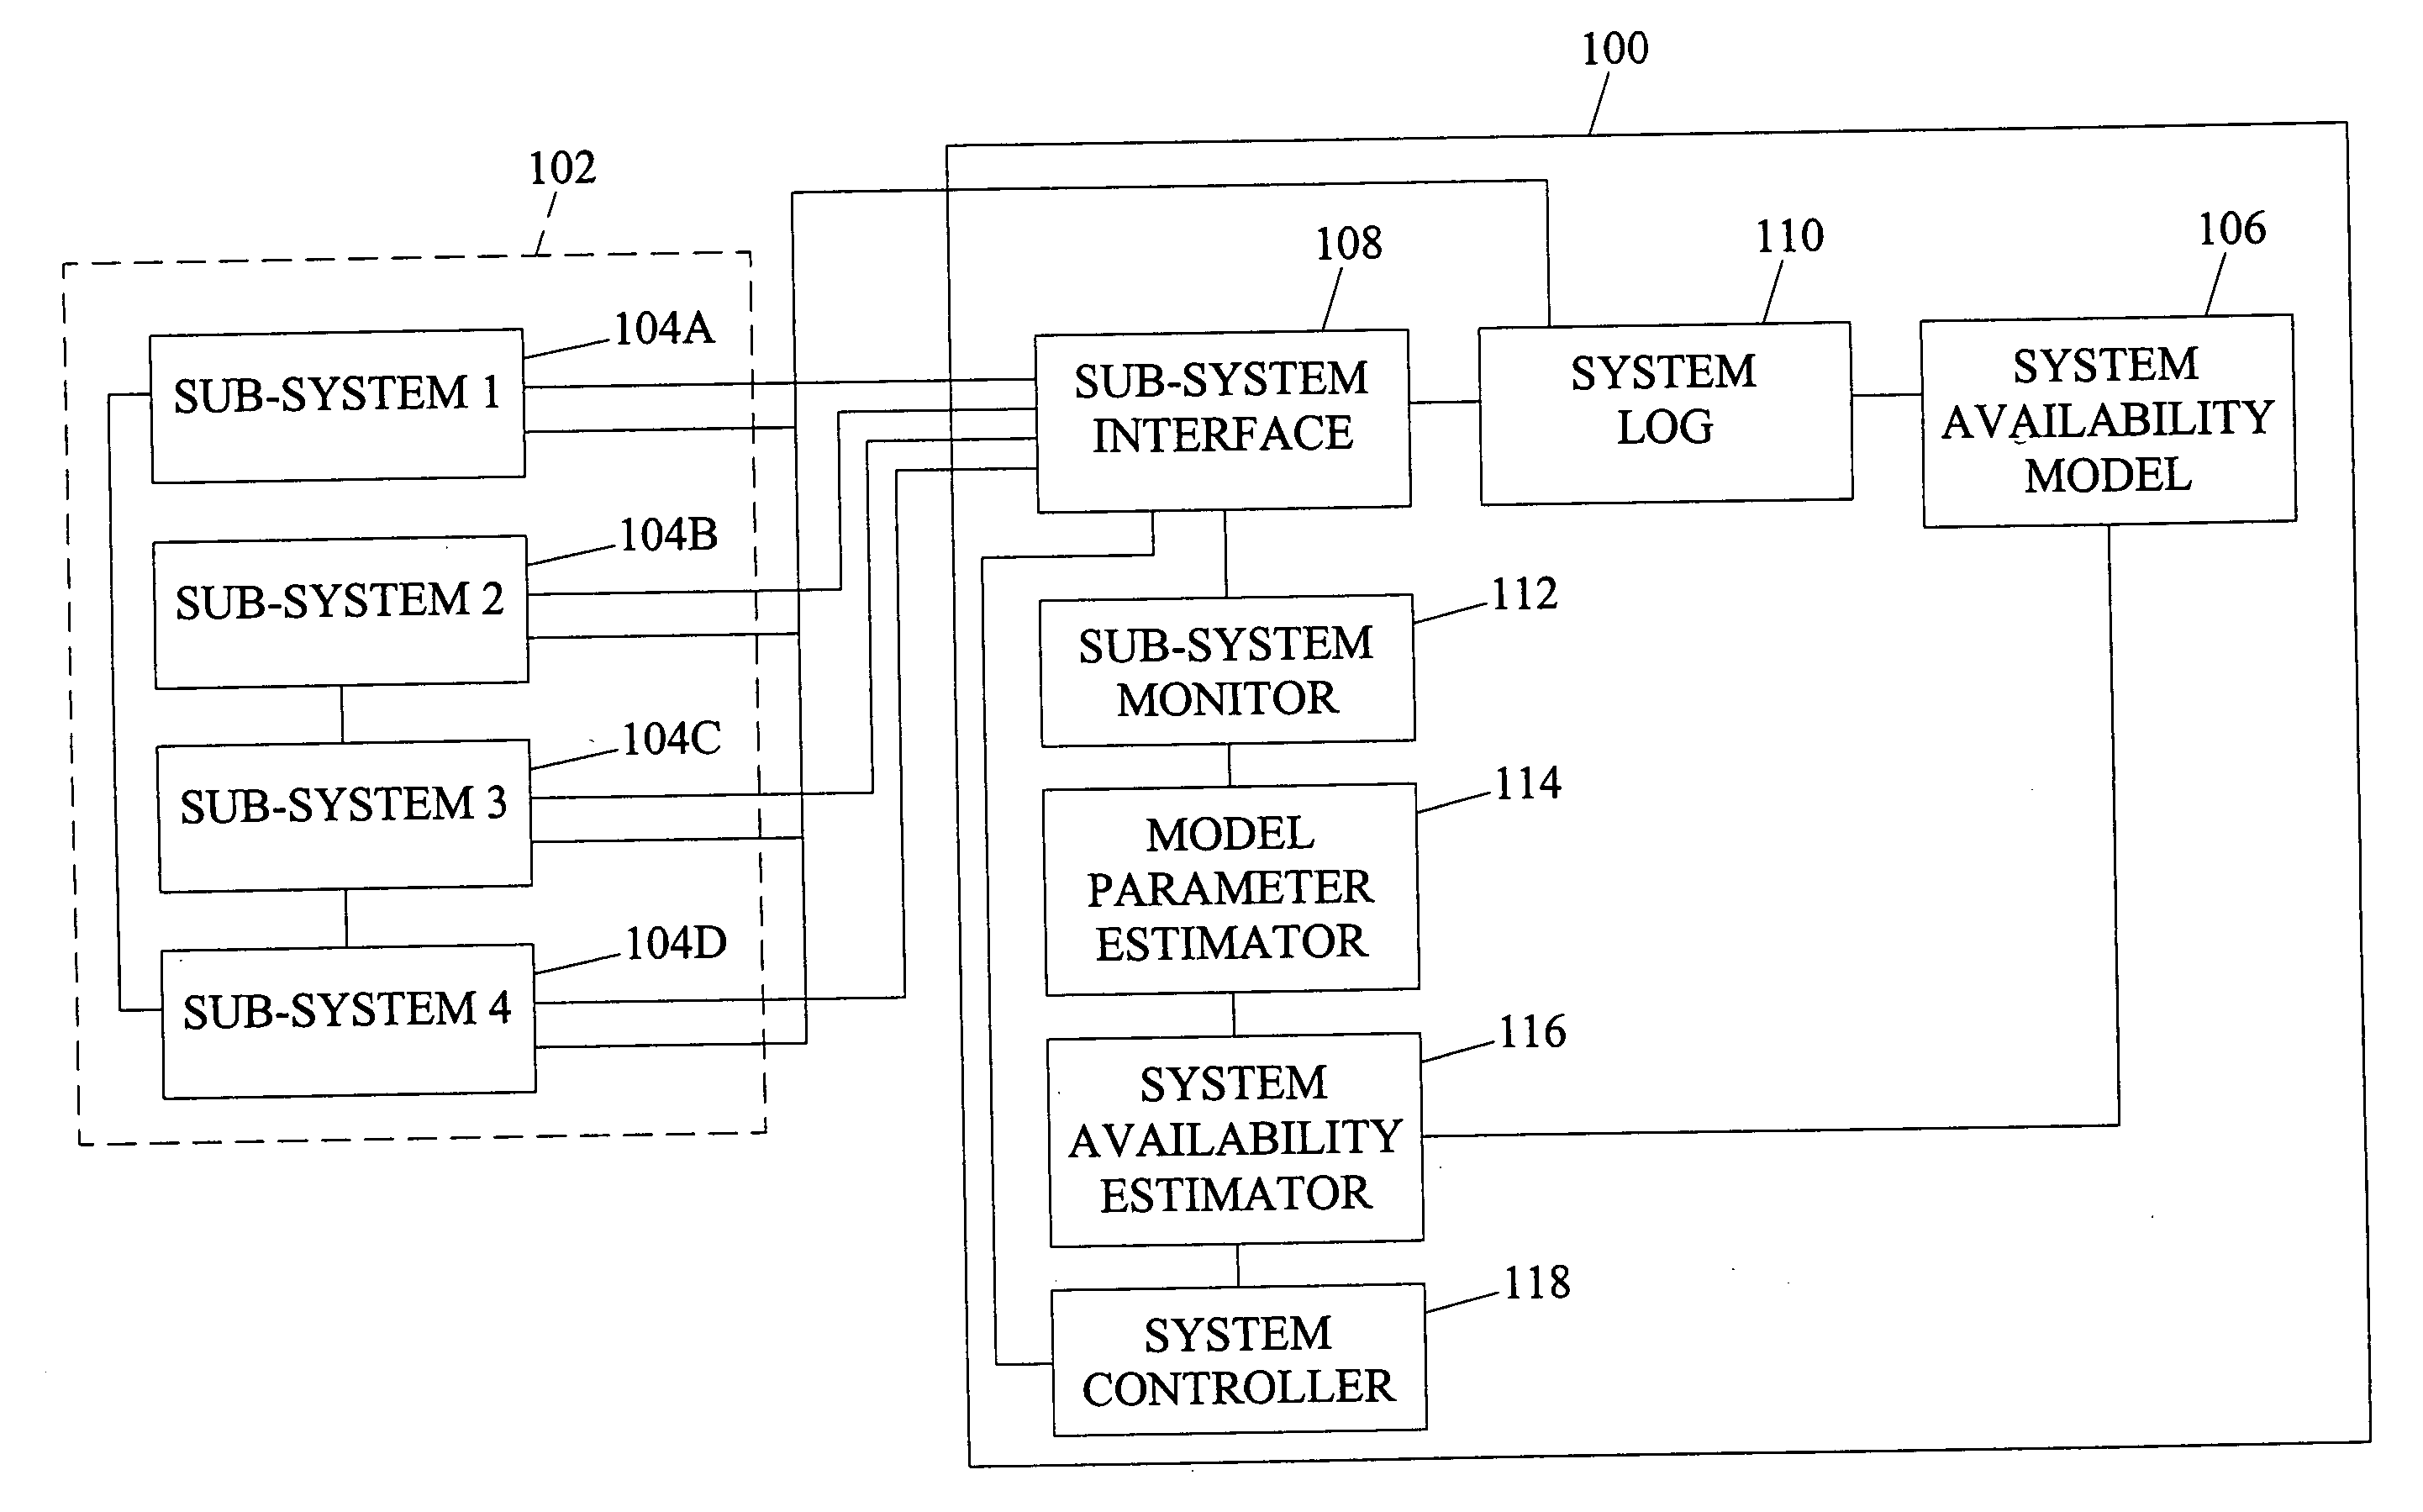 Systems, methods, and computer program products for system online availability estimation